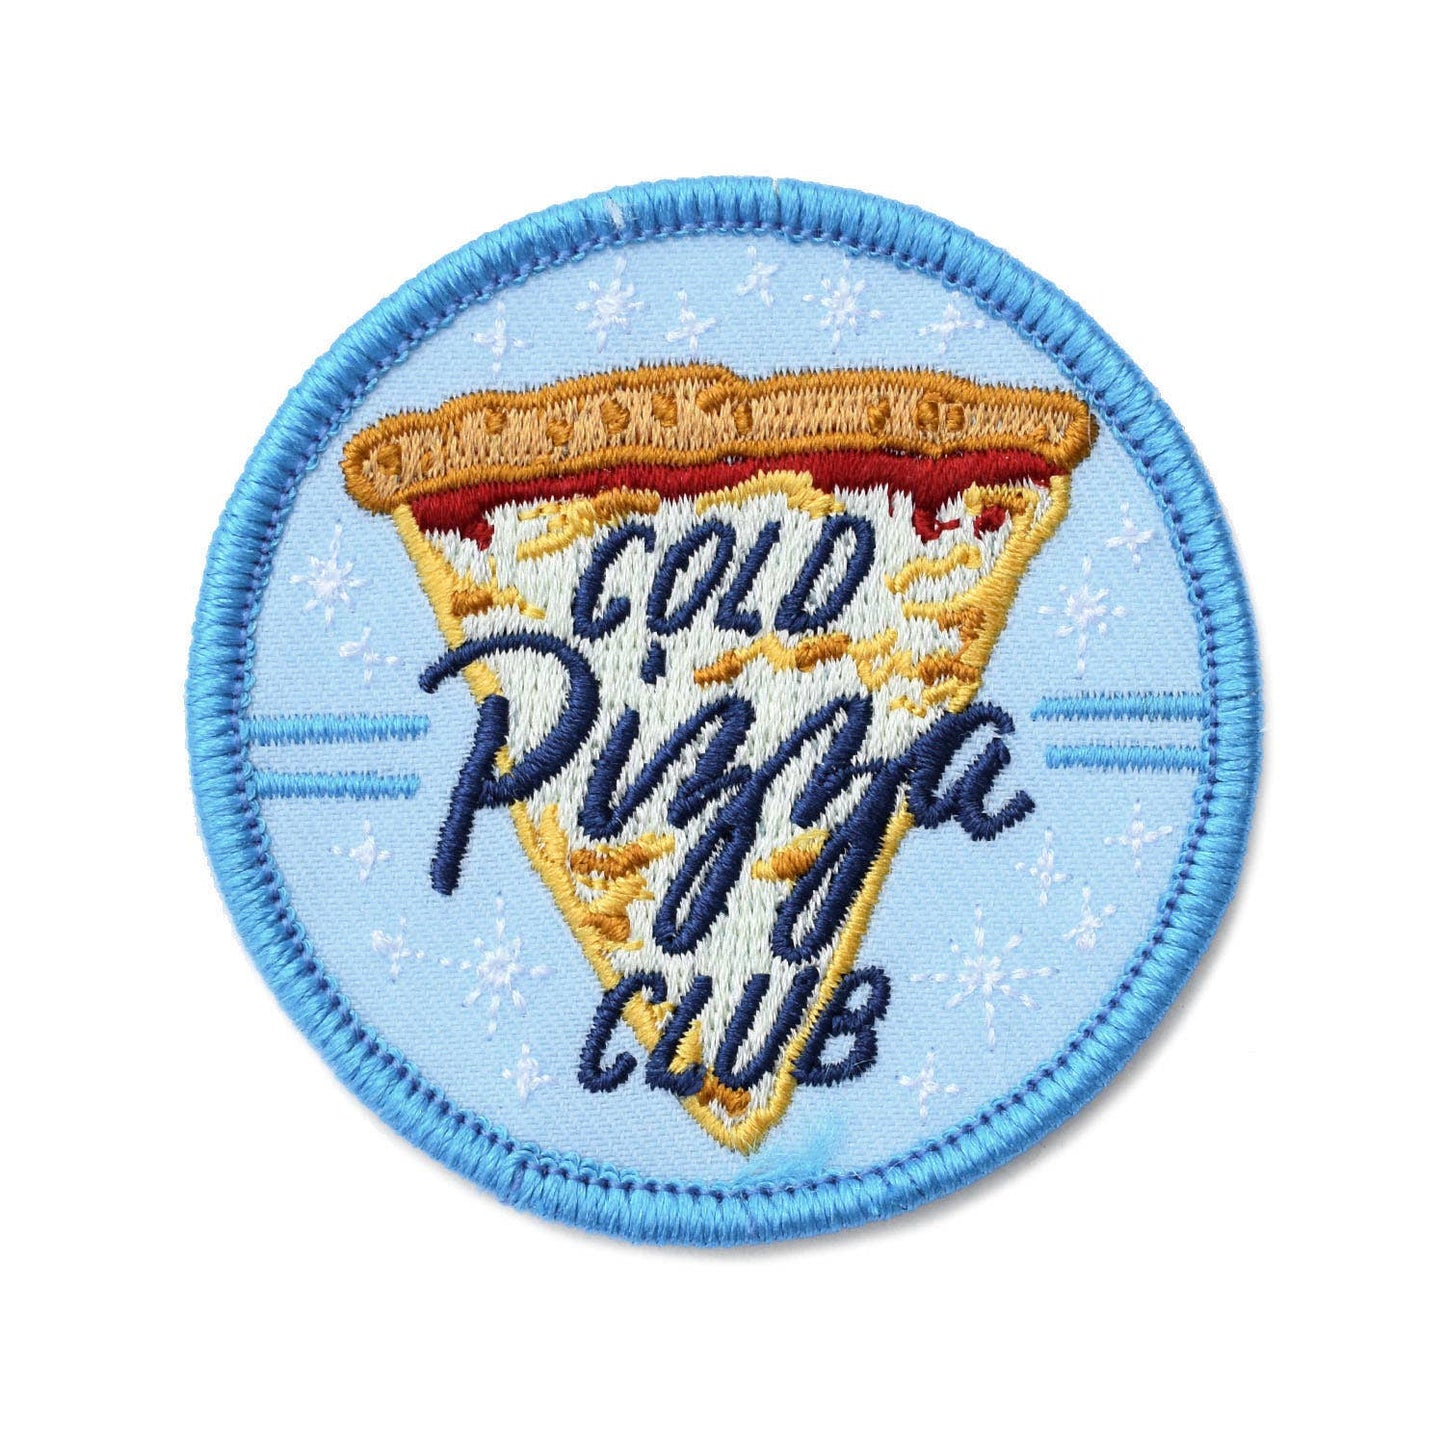 Cold Pizza Patch